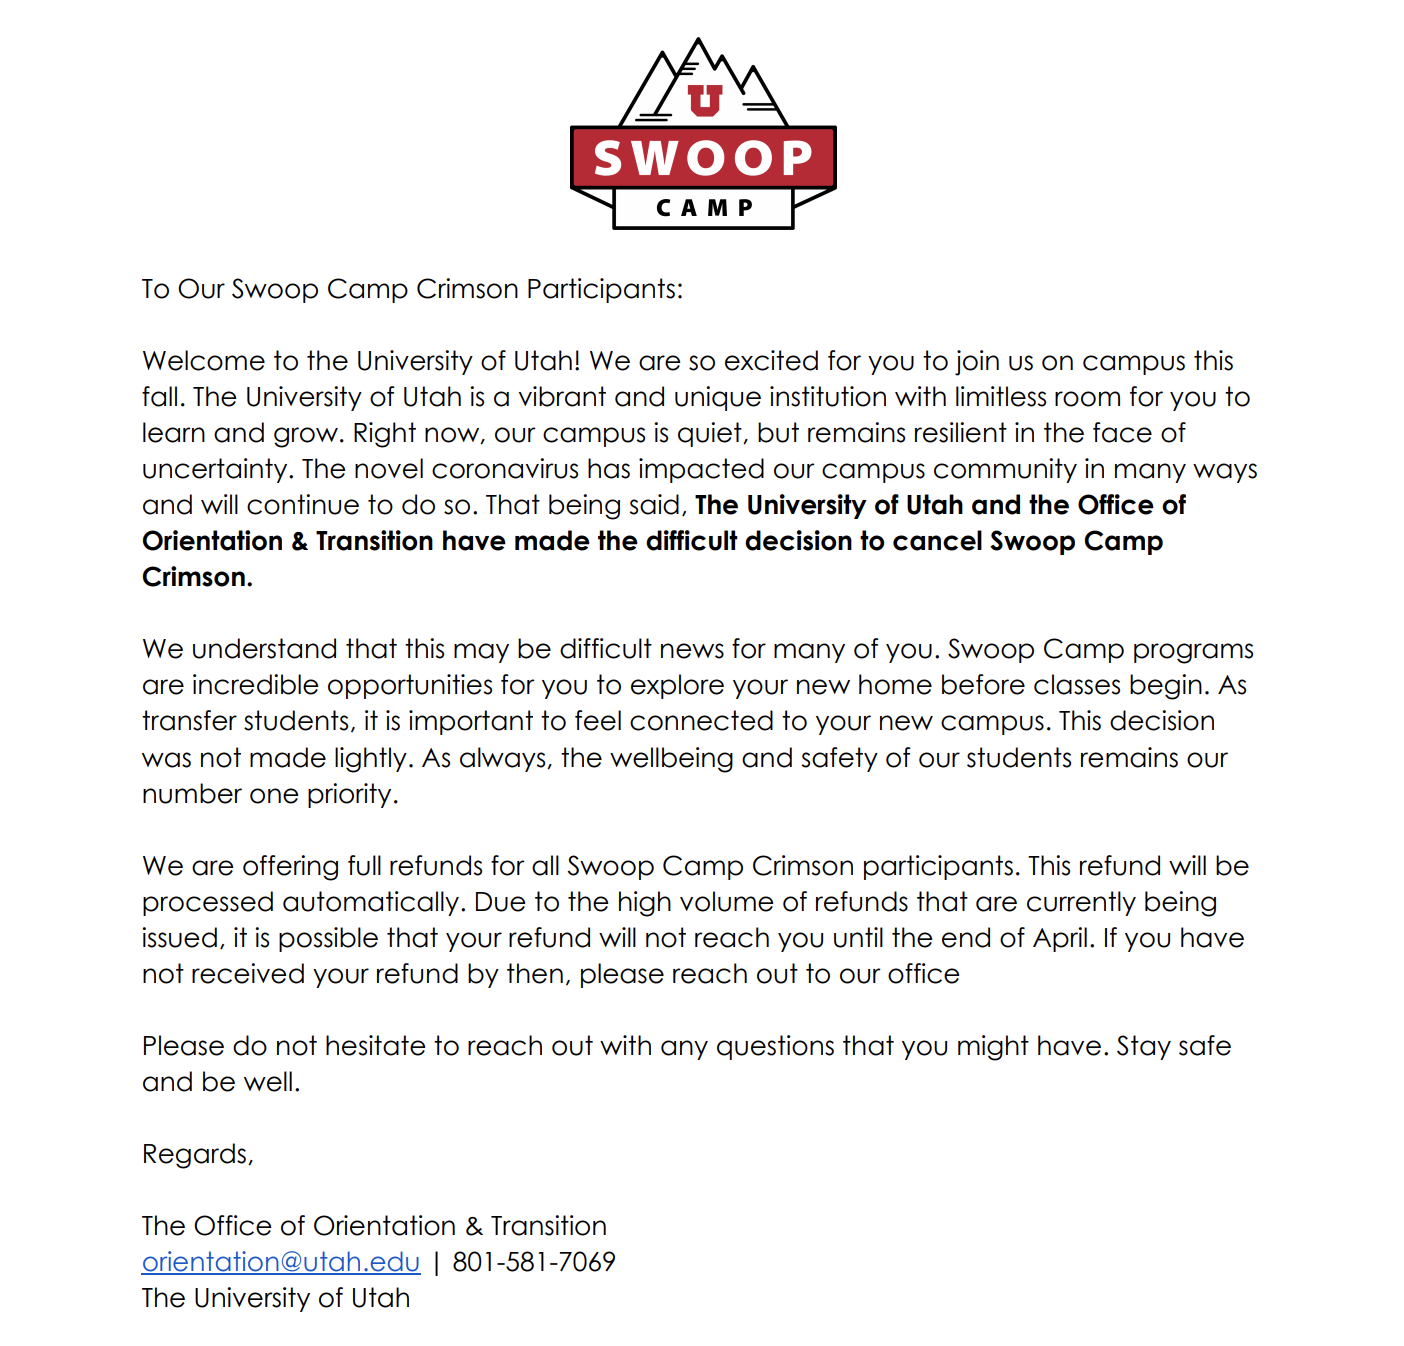 Letter of Cancellation for Crimson